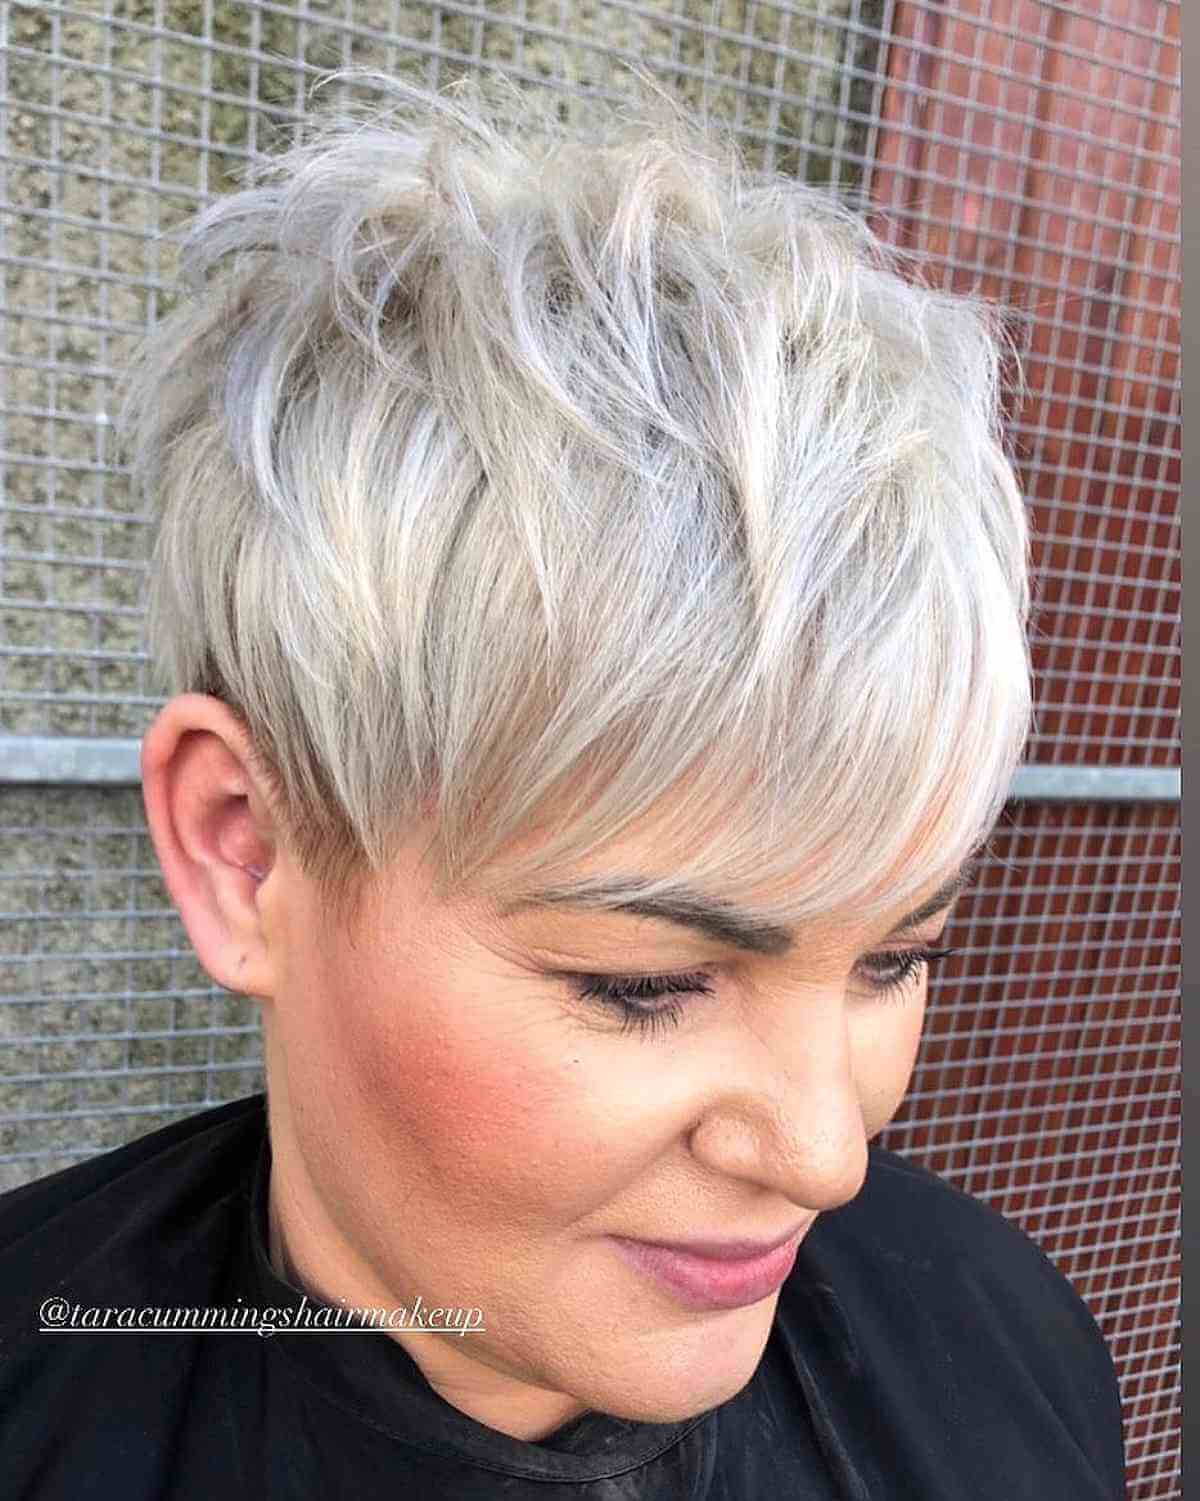 Icy Blonde Long Pixie Cut with Sweeping Bangs